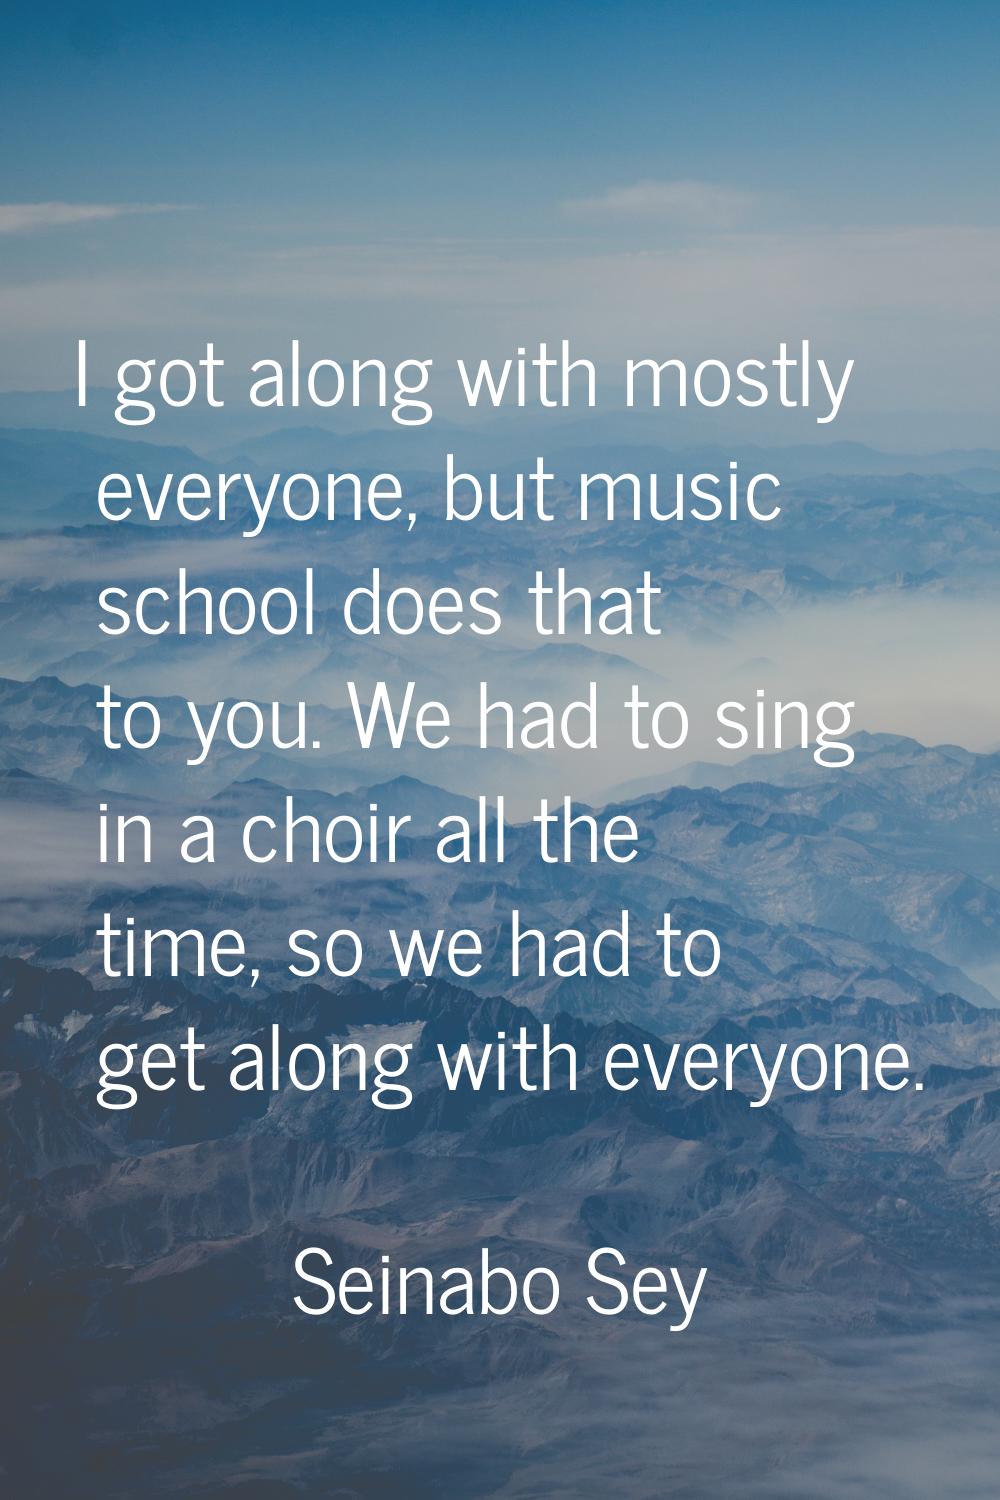 I got along with mostly everyone, but music school does that to you. We had to sing in a choir all 